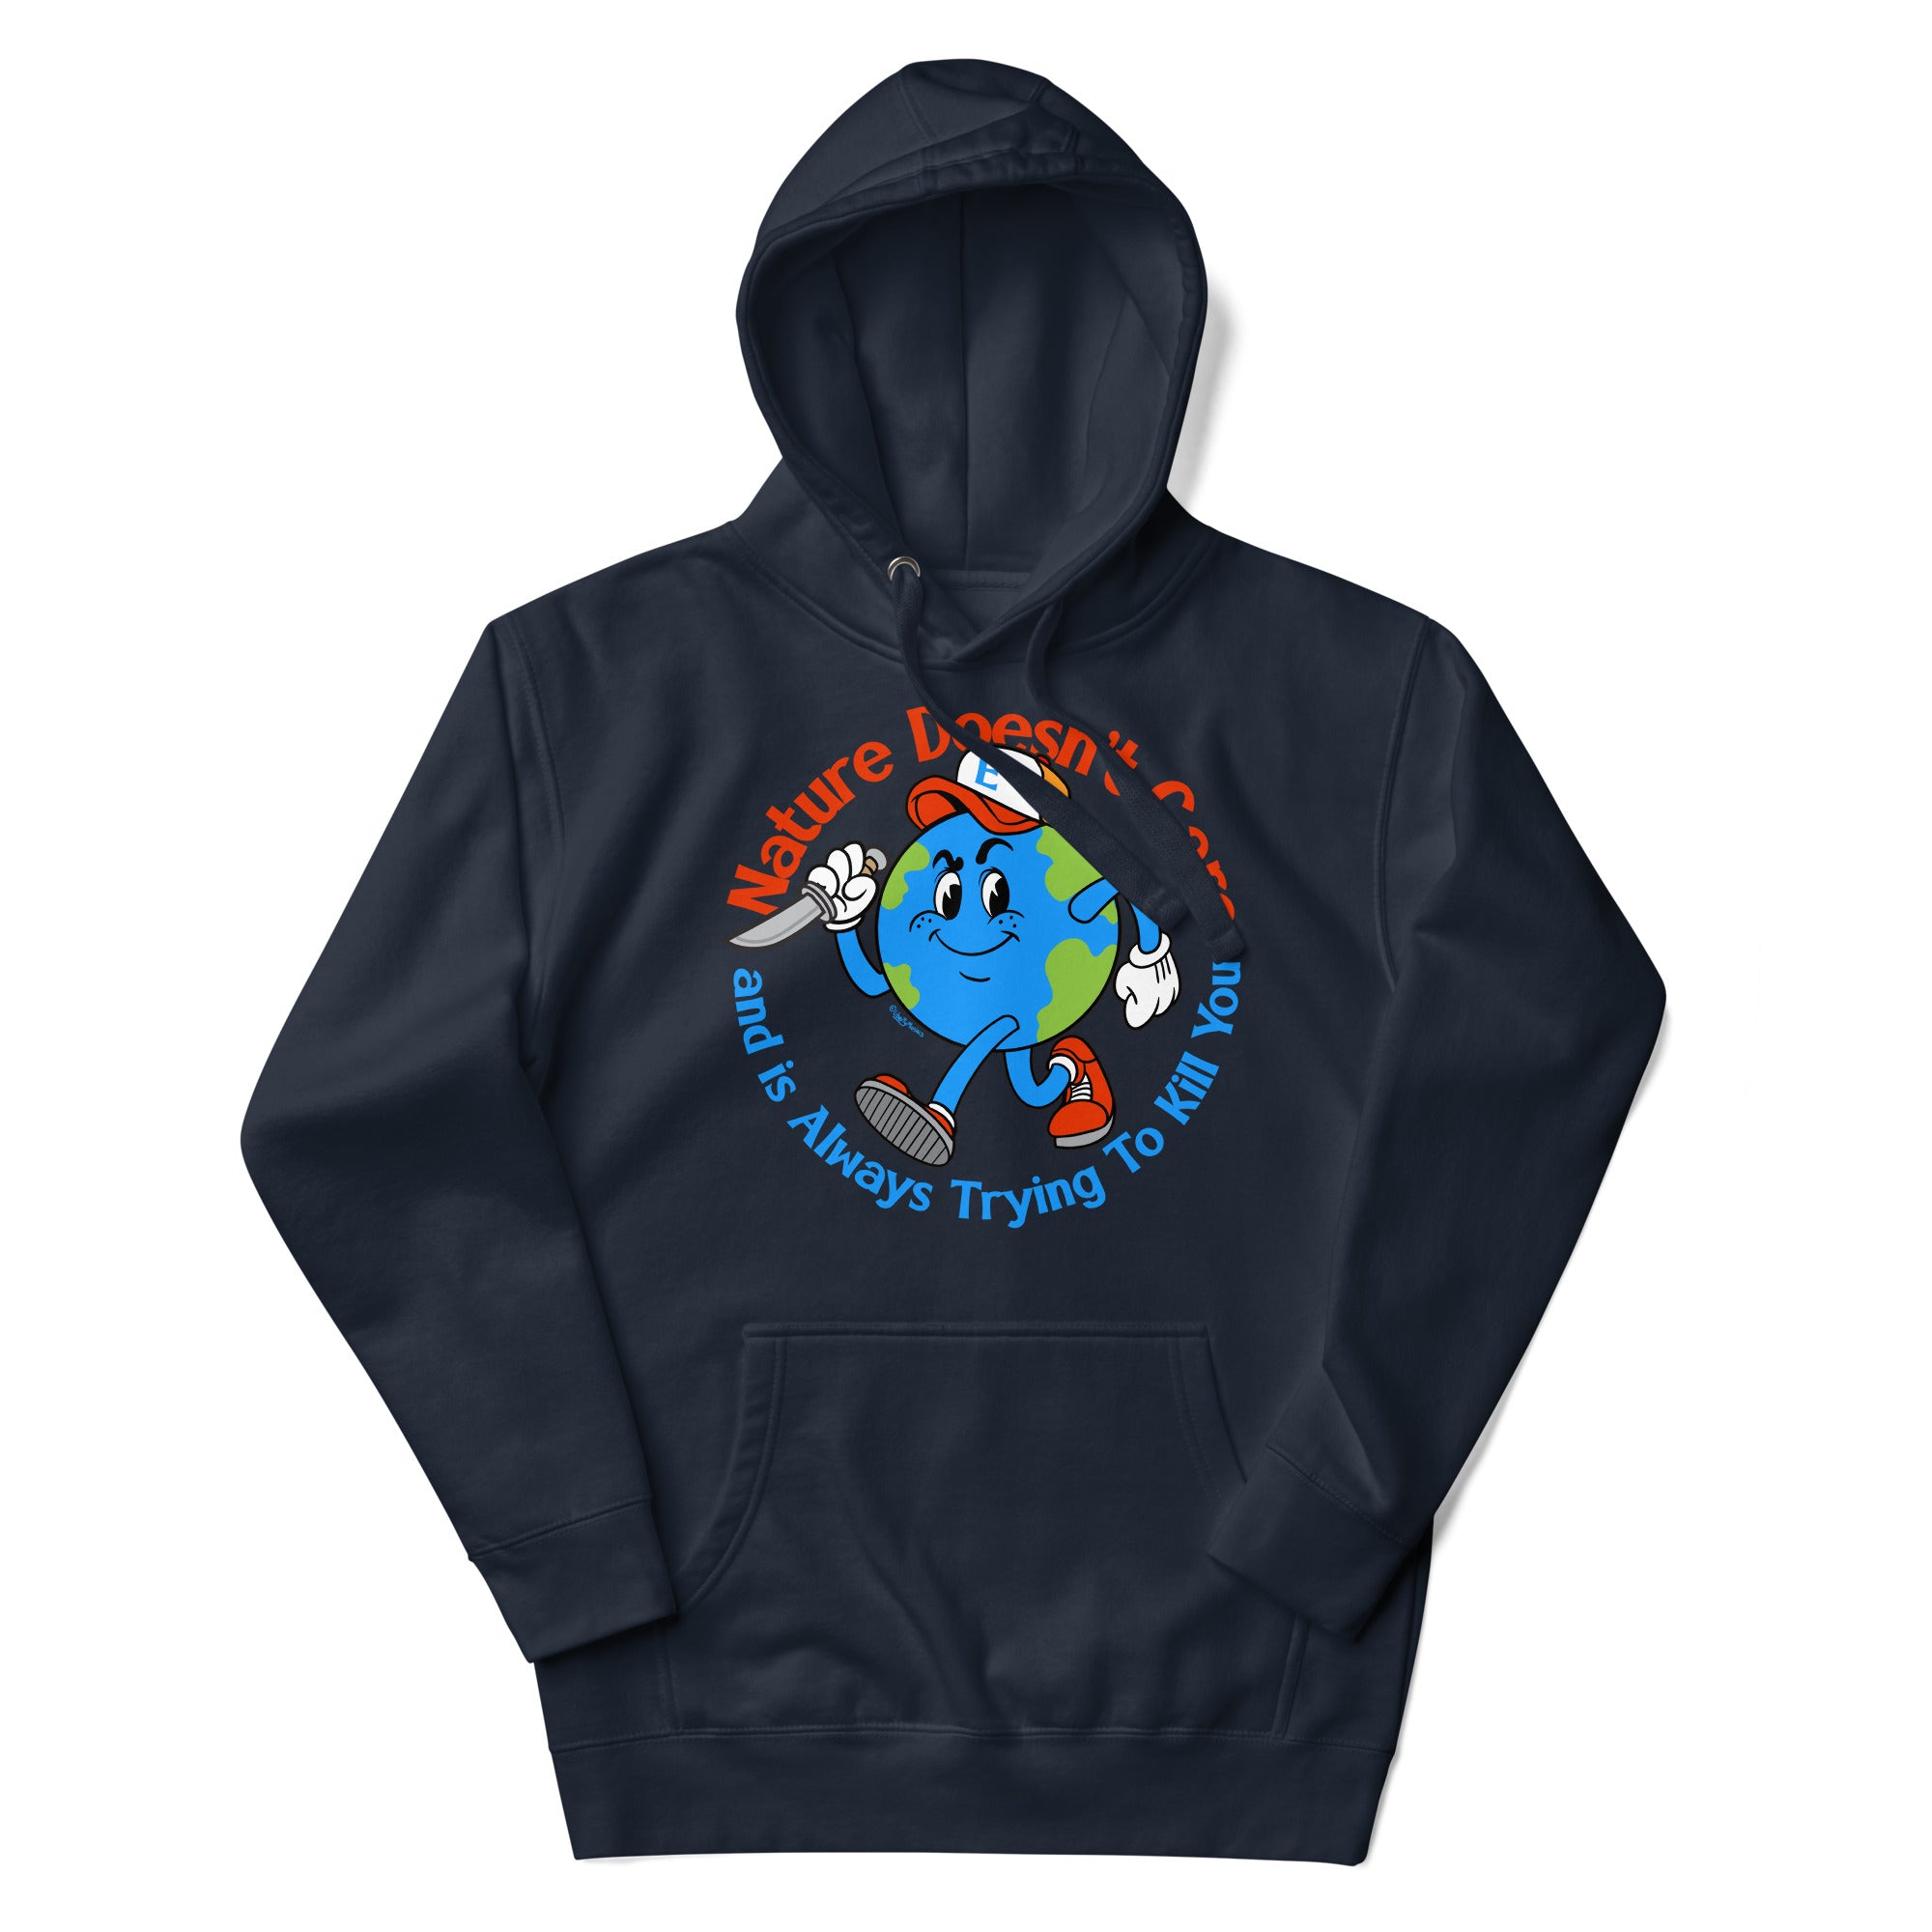 Nature Doesn't Care Hoodie